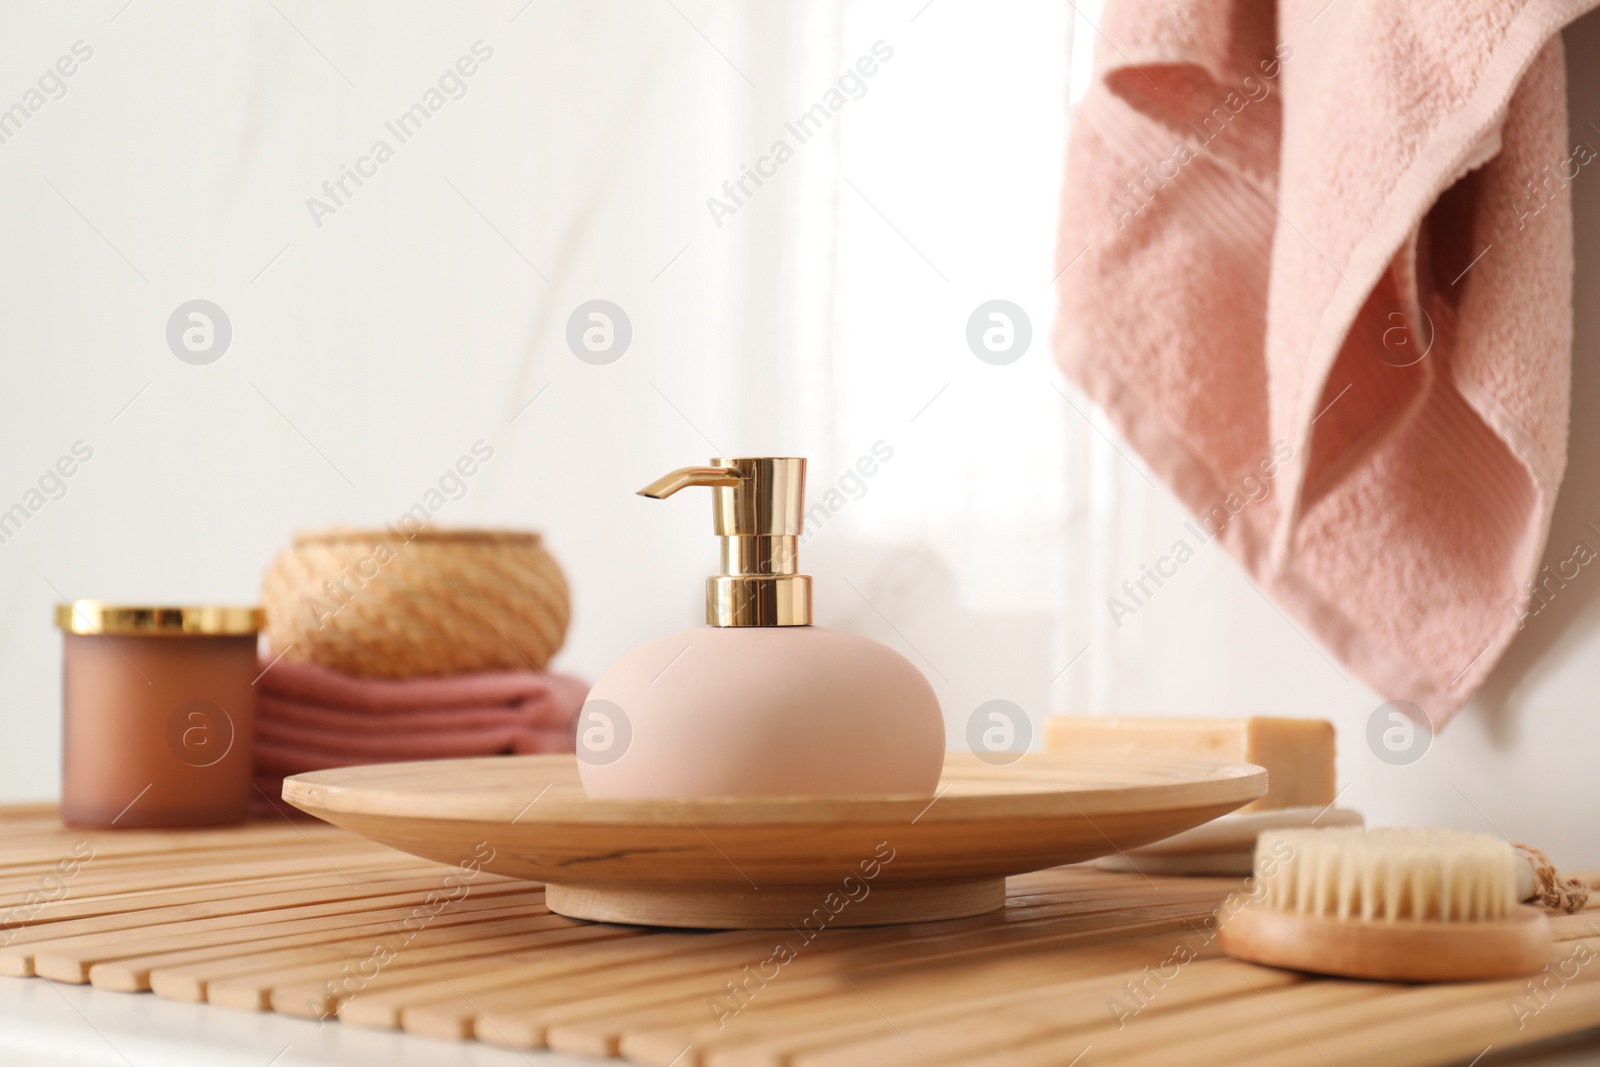 Photo of Different toiletries on wooden countertop in bathroom